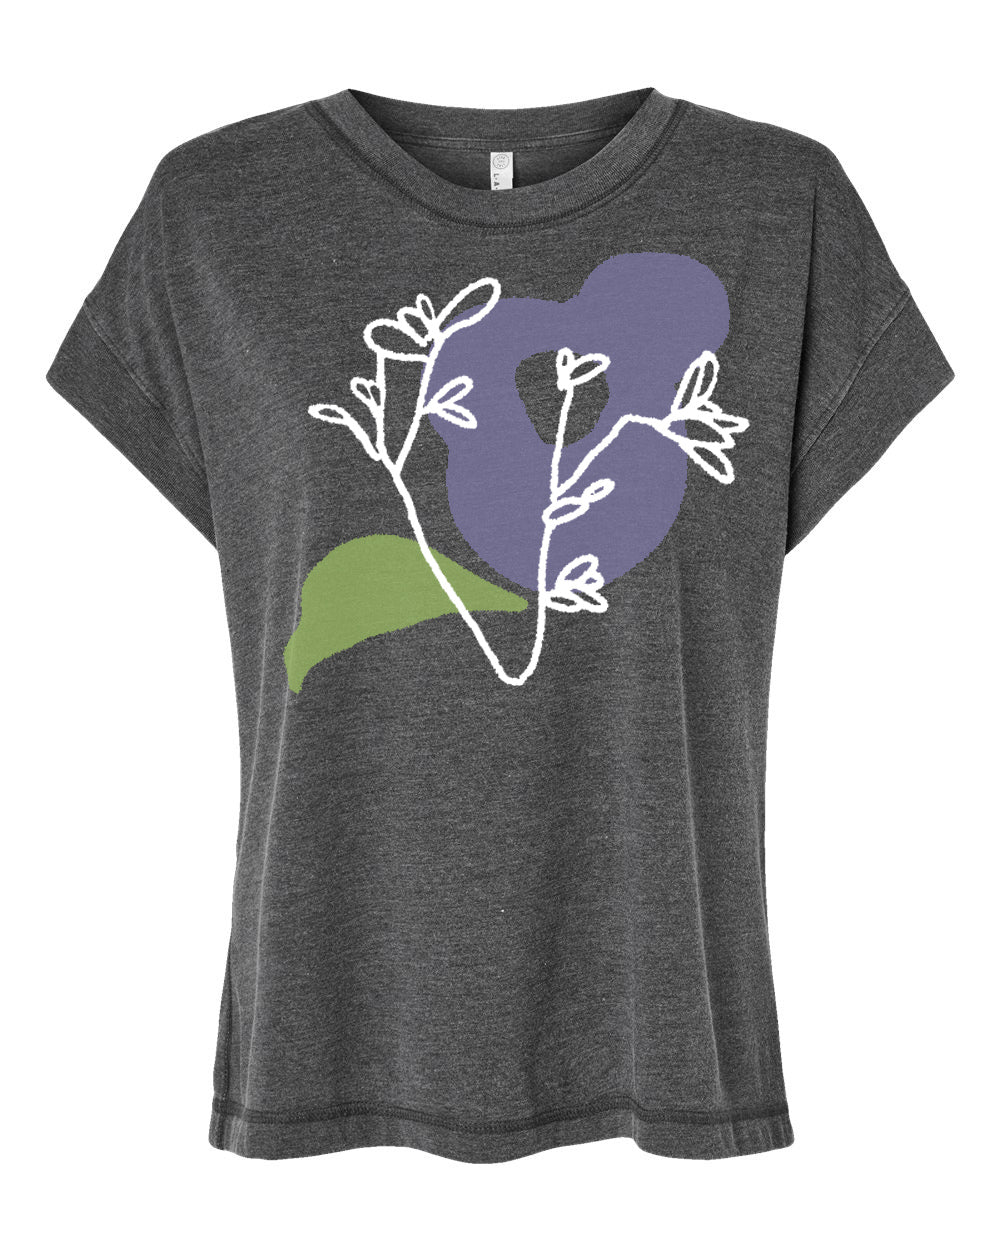 Abstract Floral : Women's Relaxed Vintage Wash Tee (Charcoal)